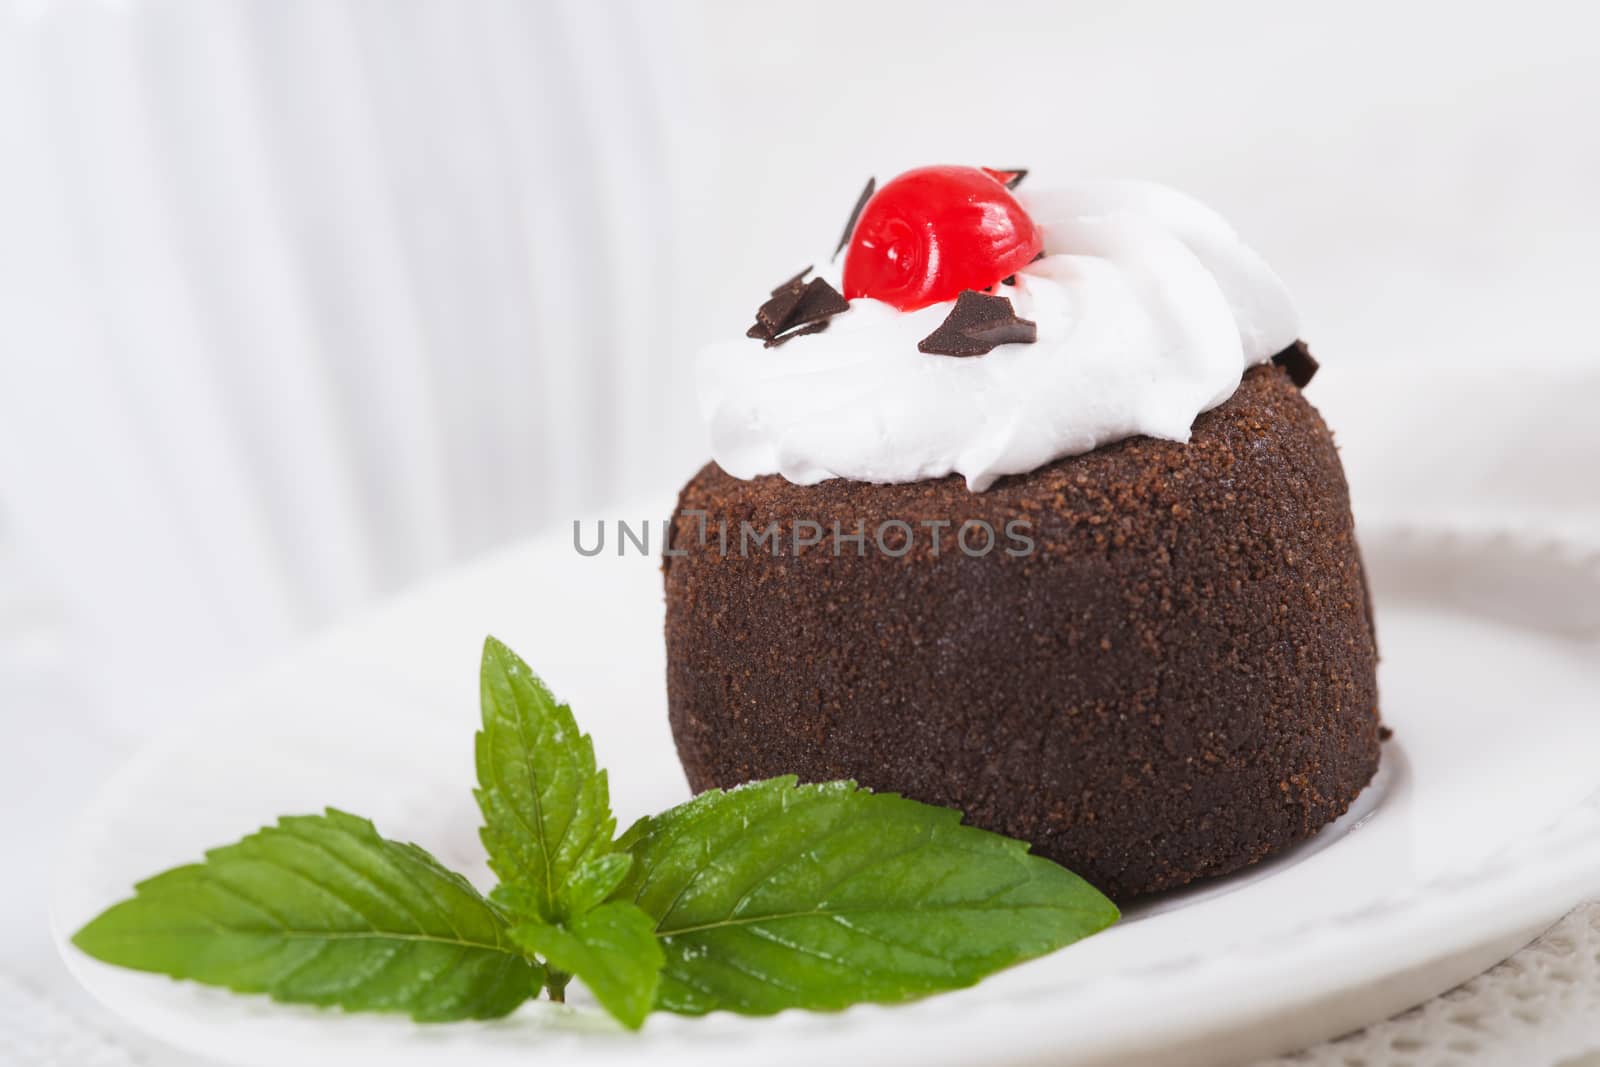 Chocolate sweet cake "Potato" on a plate, selective focus by kzen